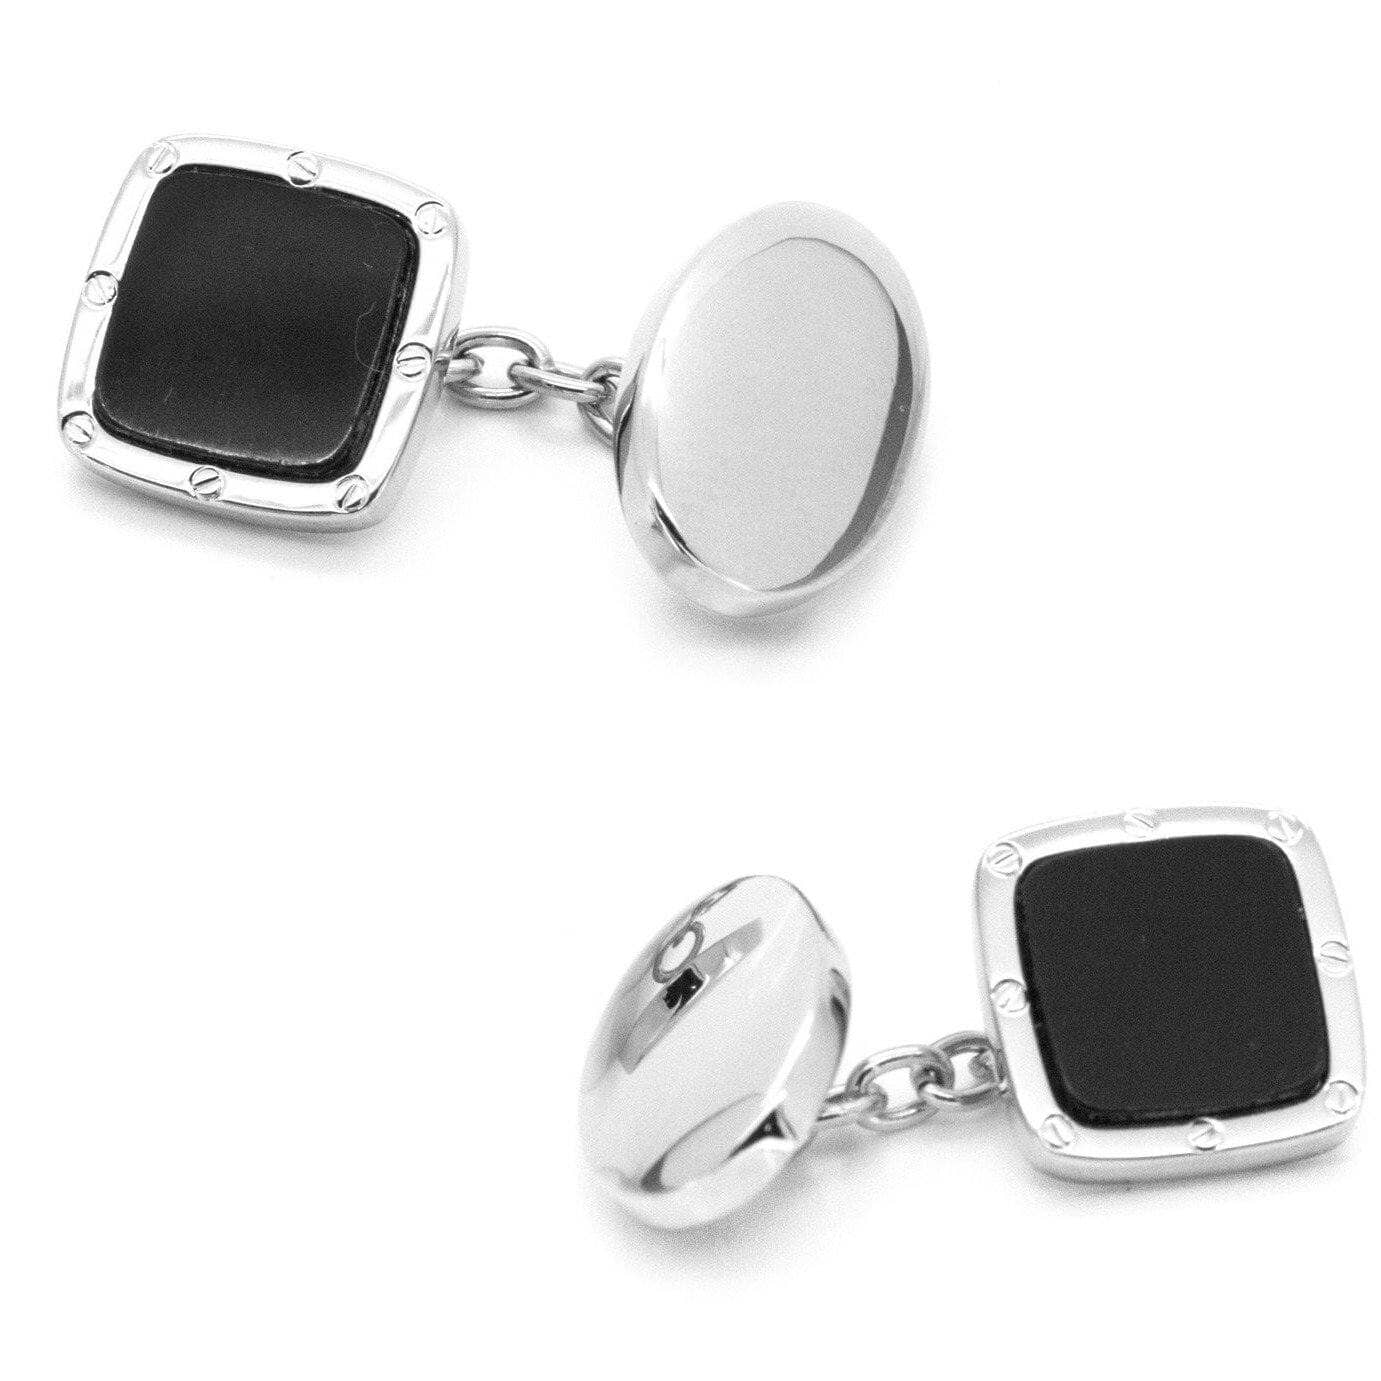 Black Square with Chain and Oval Back Cufflinks Classic & Modern Cufflinks Clinks Australia Black Square with Chain and Oval Back Cufflinks 